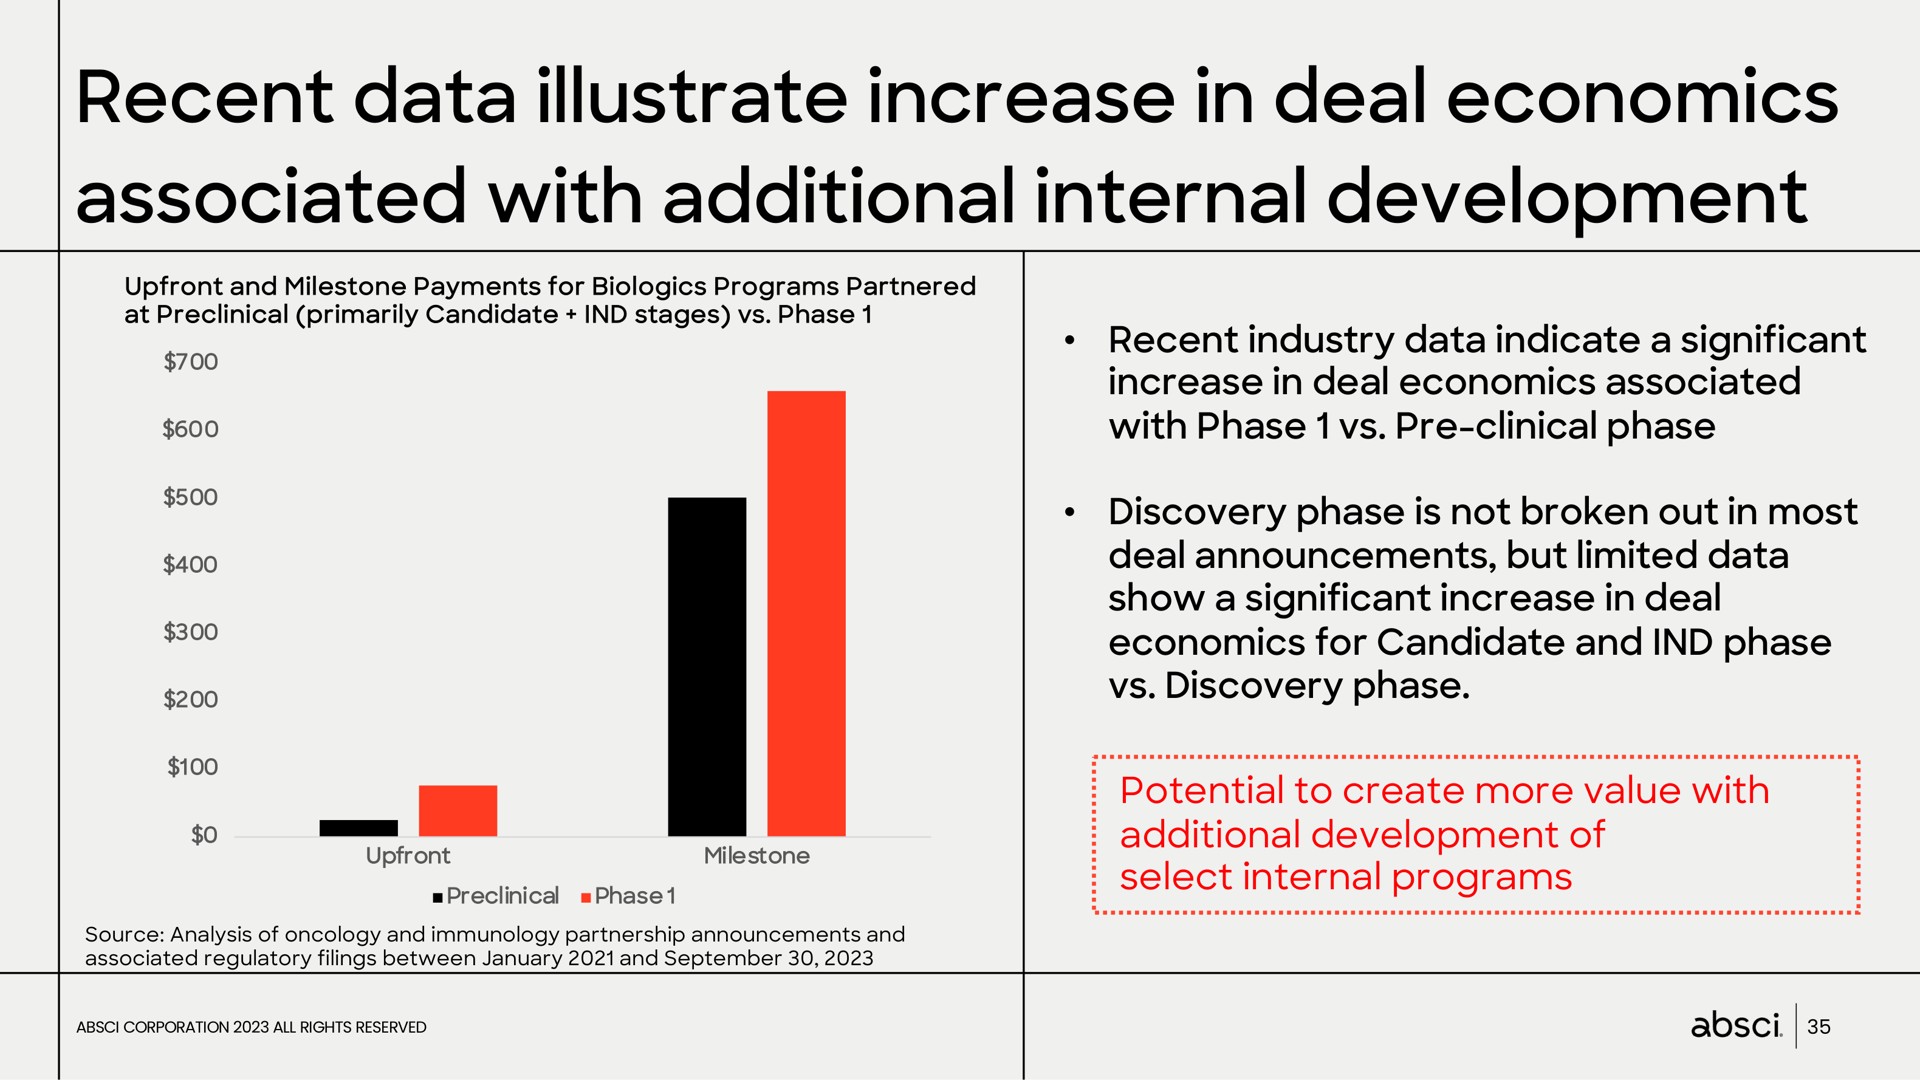 recent data illustrate increase in deal economics associated with additional internal development | Absci